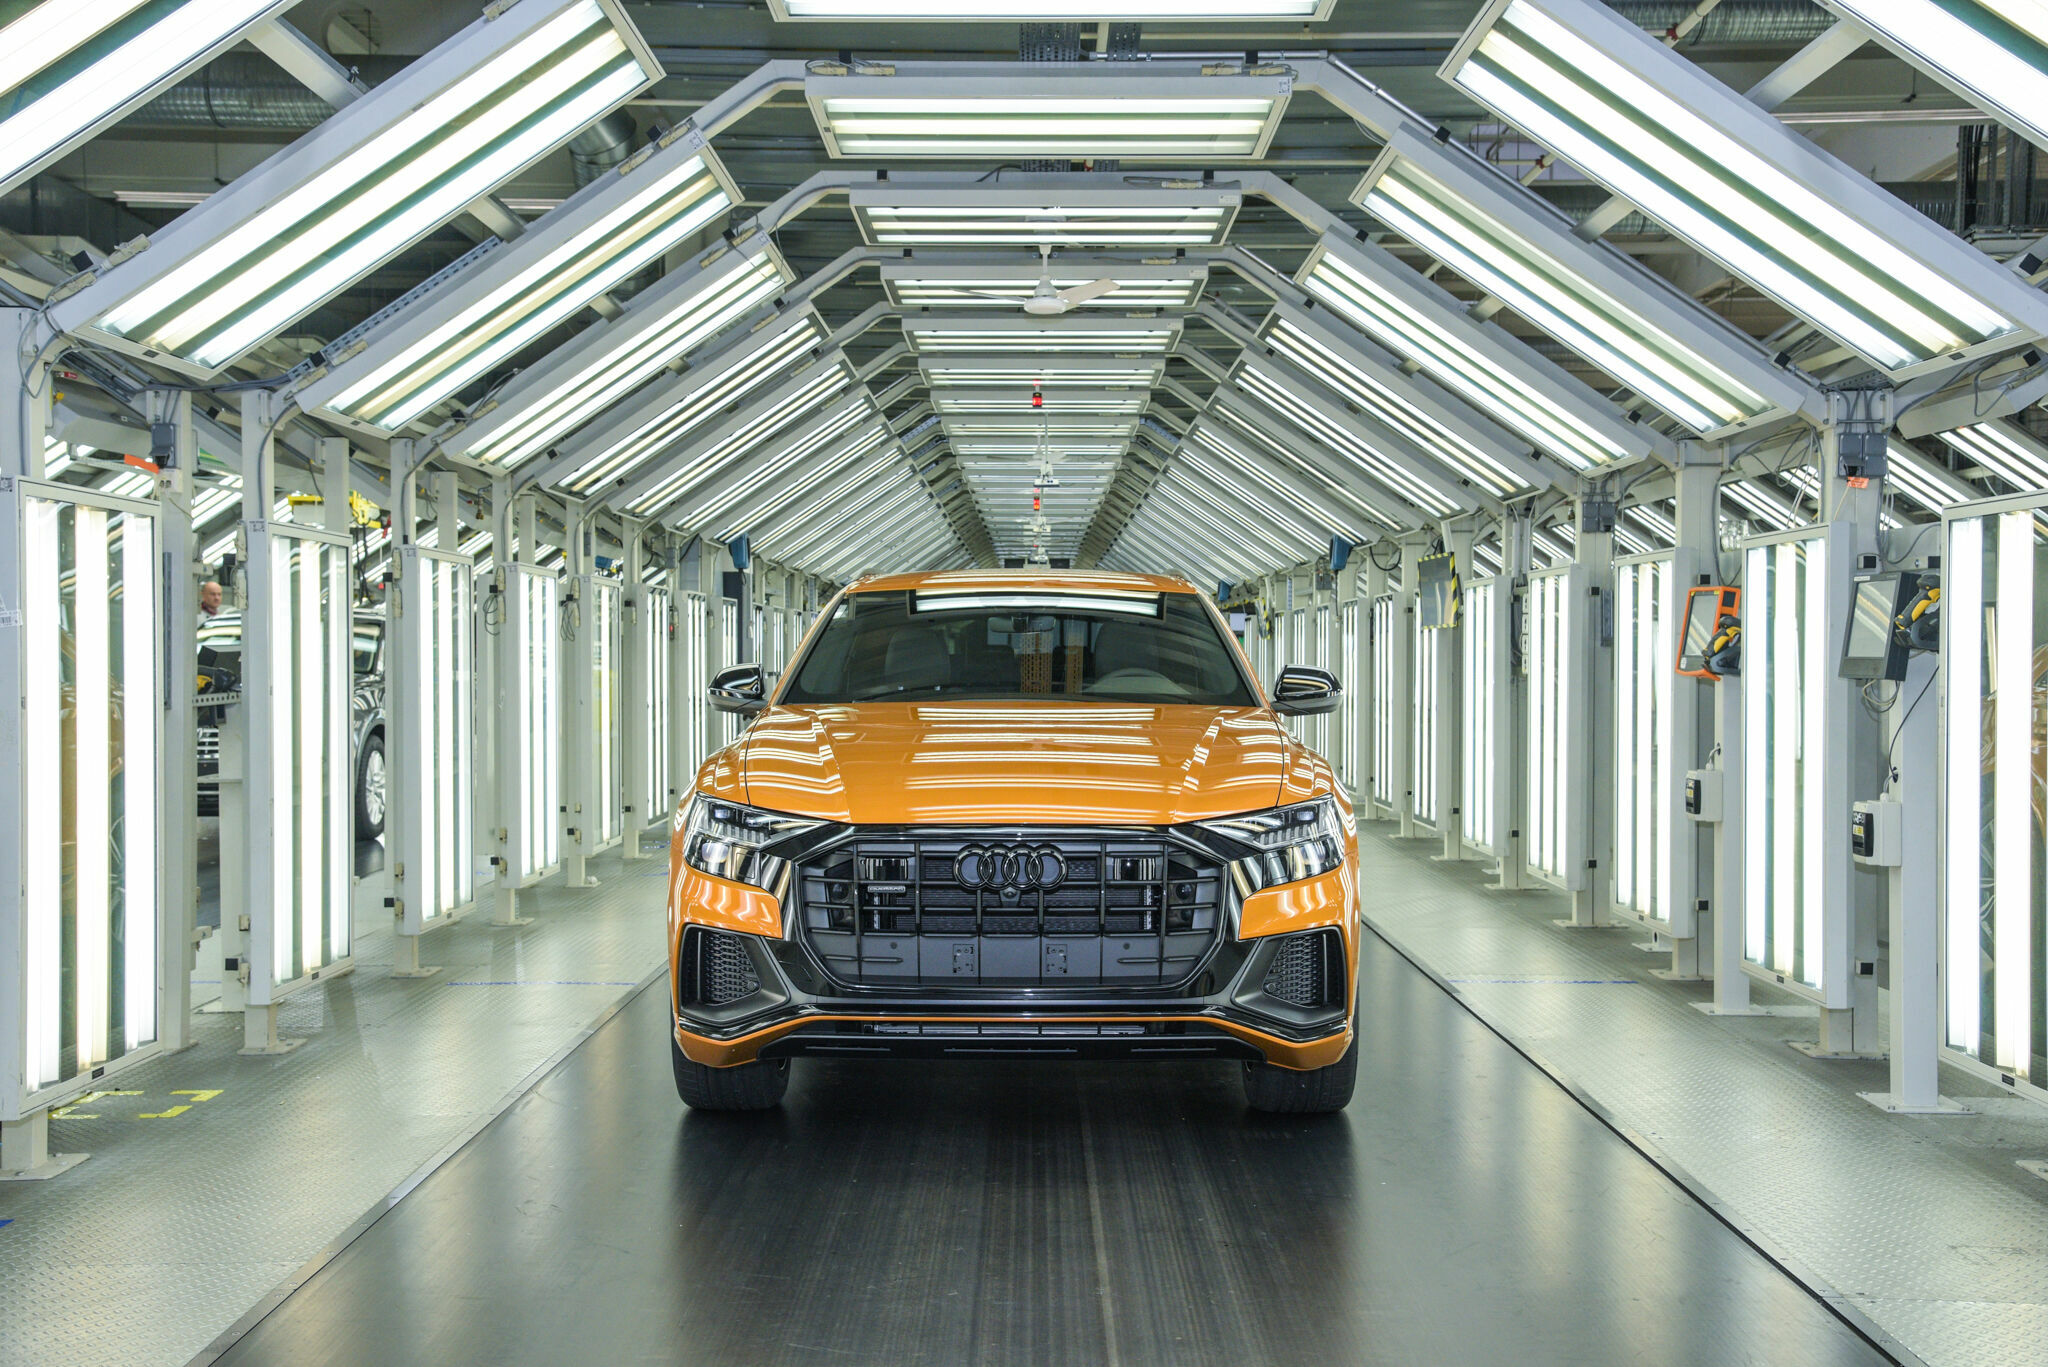 Production of the new Audi Q8 with the plug-in hybrid drive started at the Volkswagen Slovakia site in Bratislava at the end of 2020.